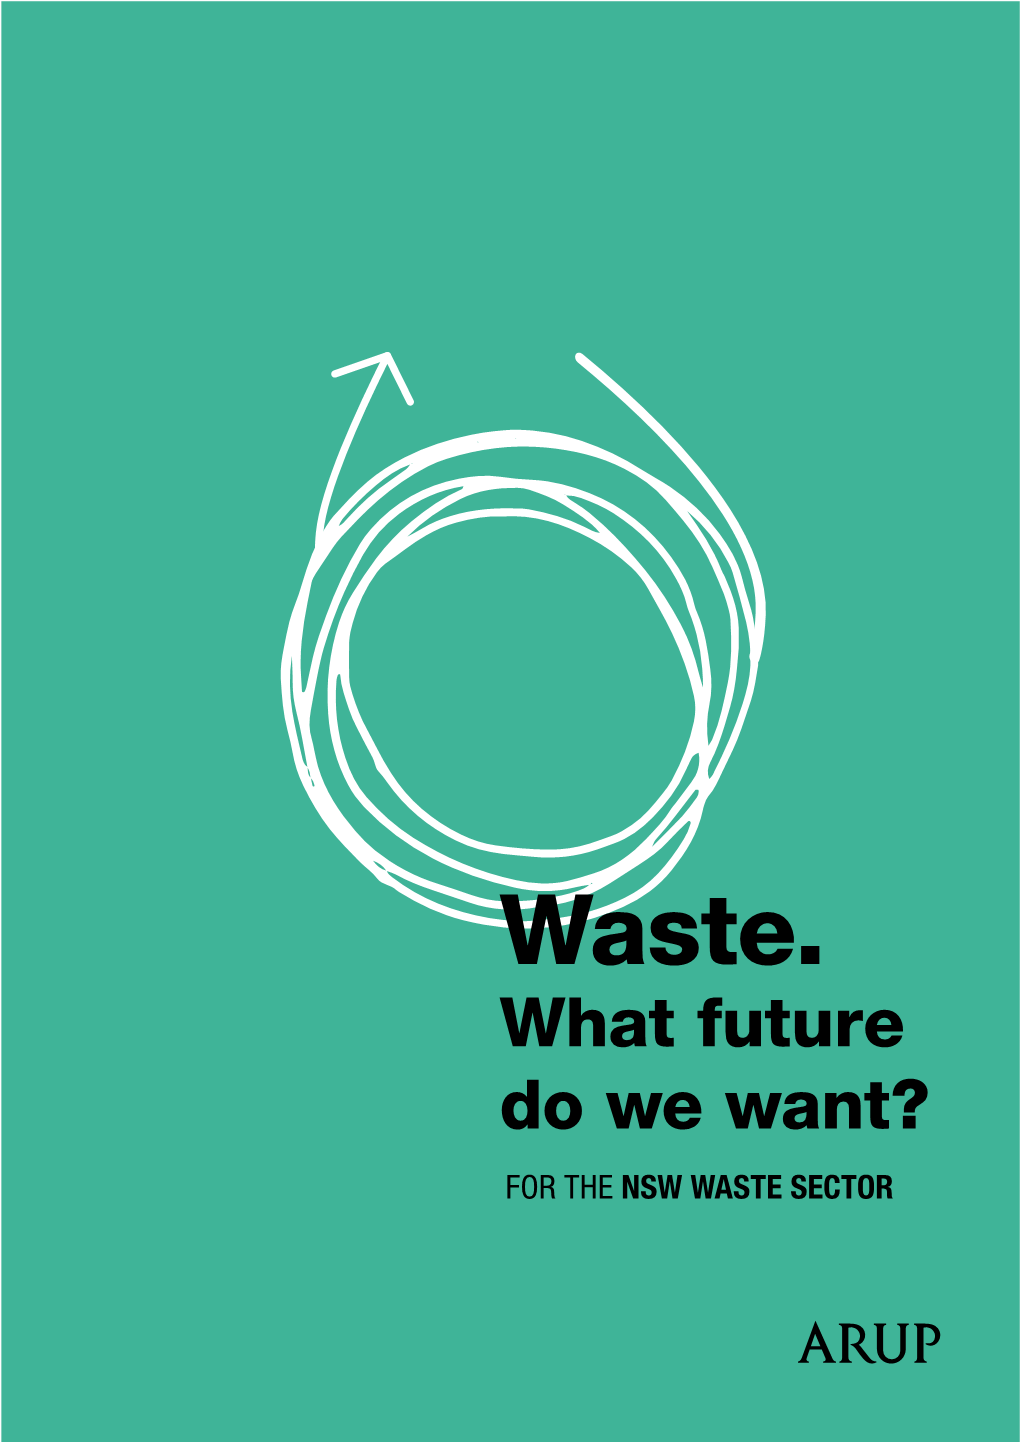 Waste. What Future Do We Want? for the NSW WASTE SECTOR